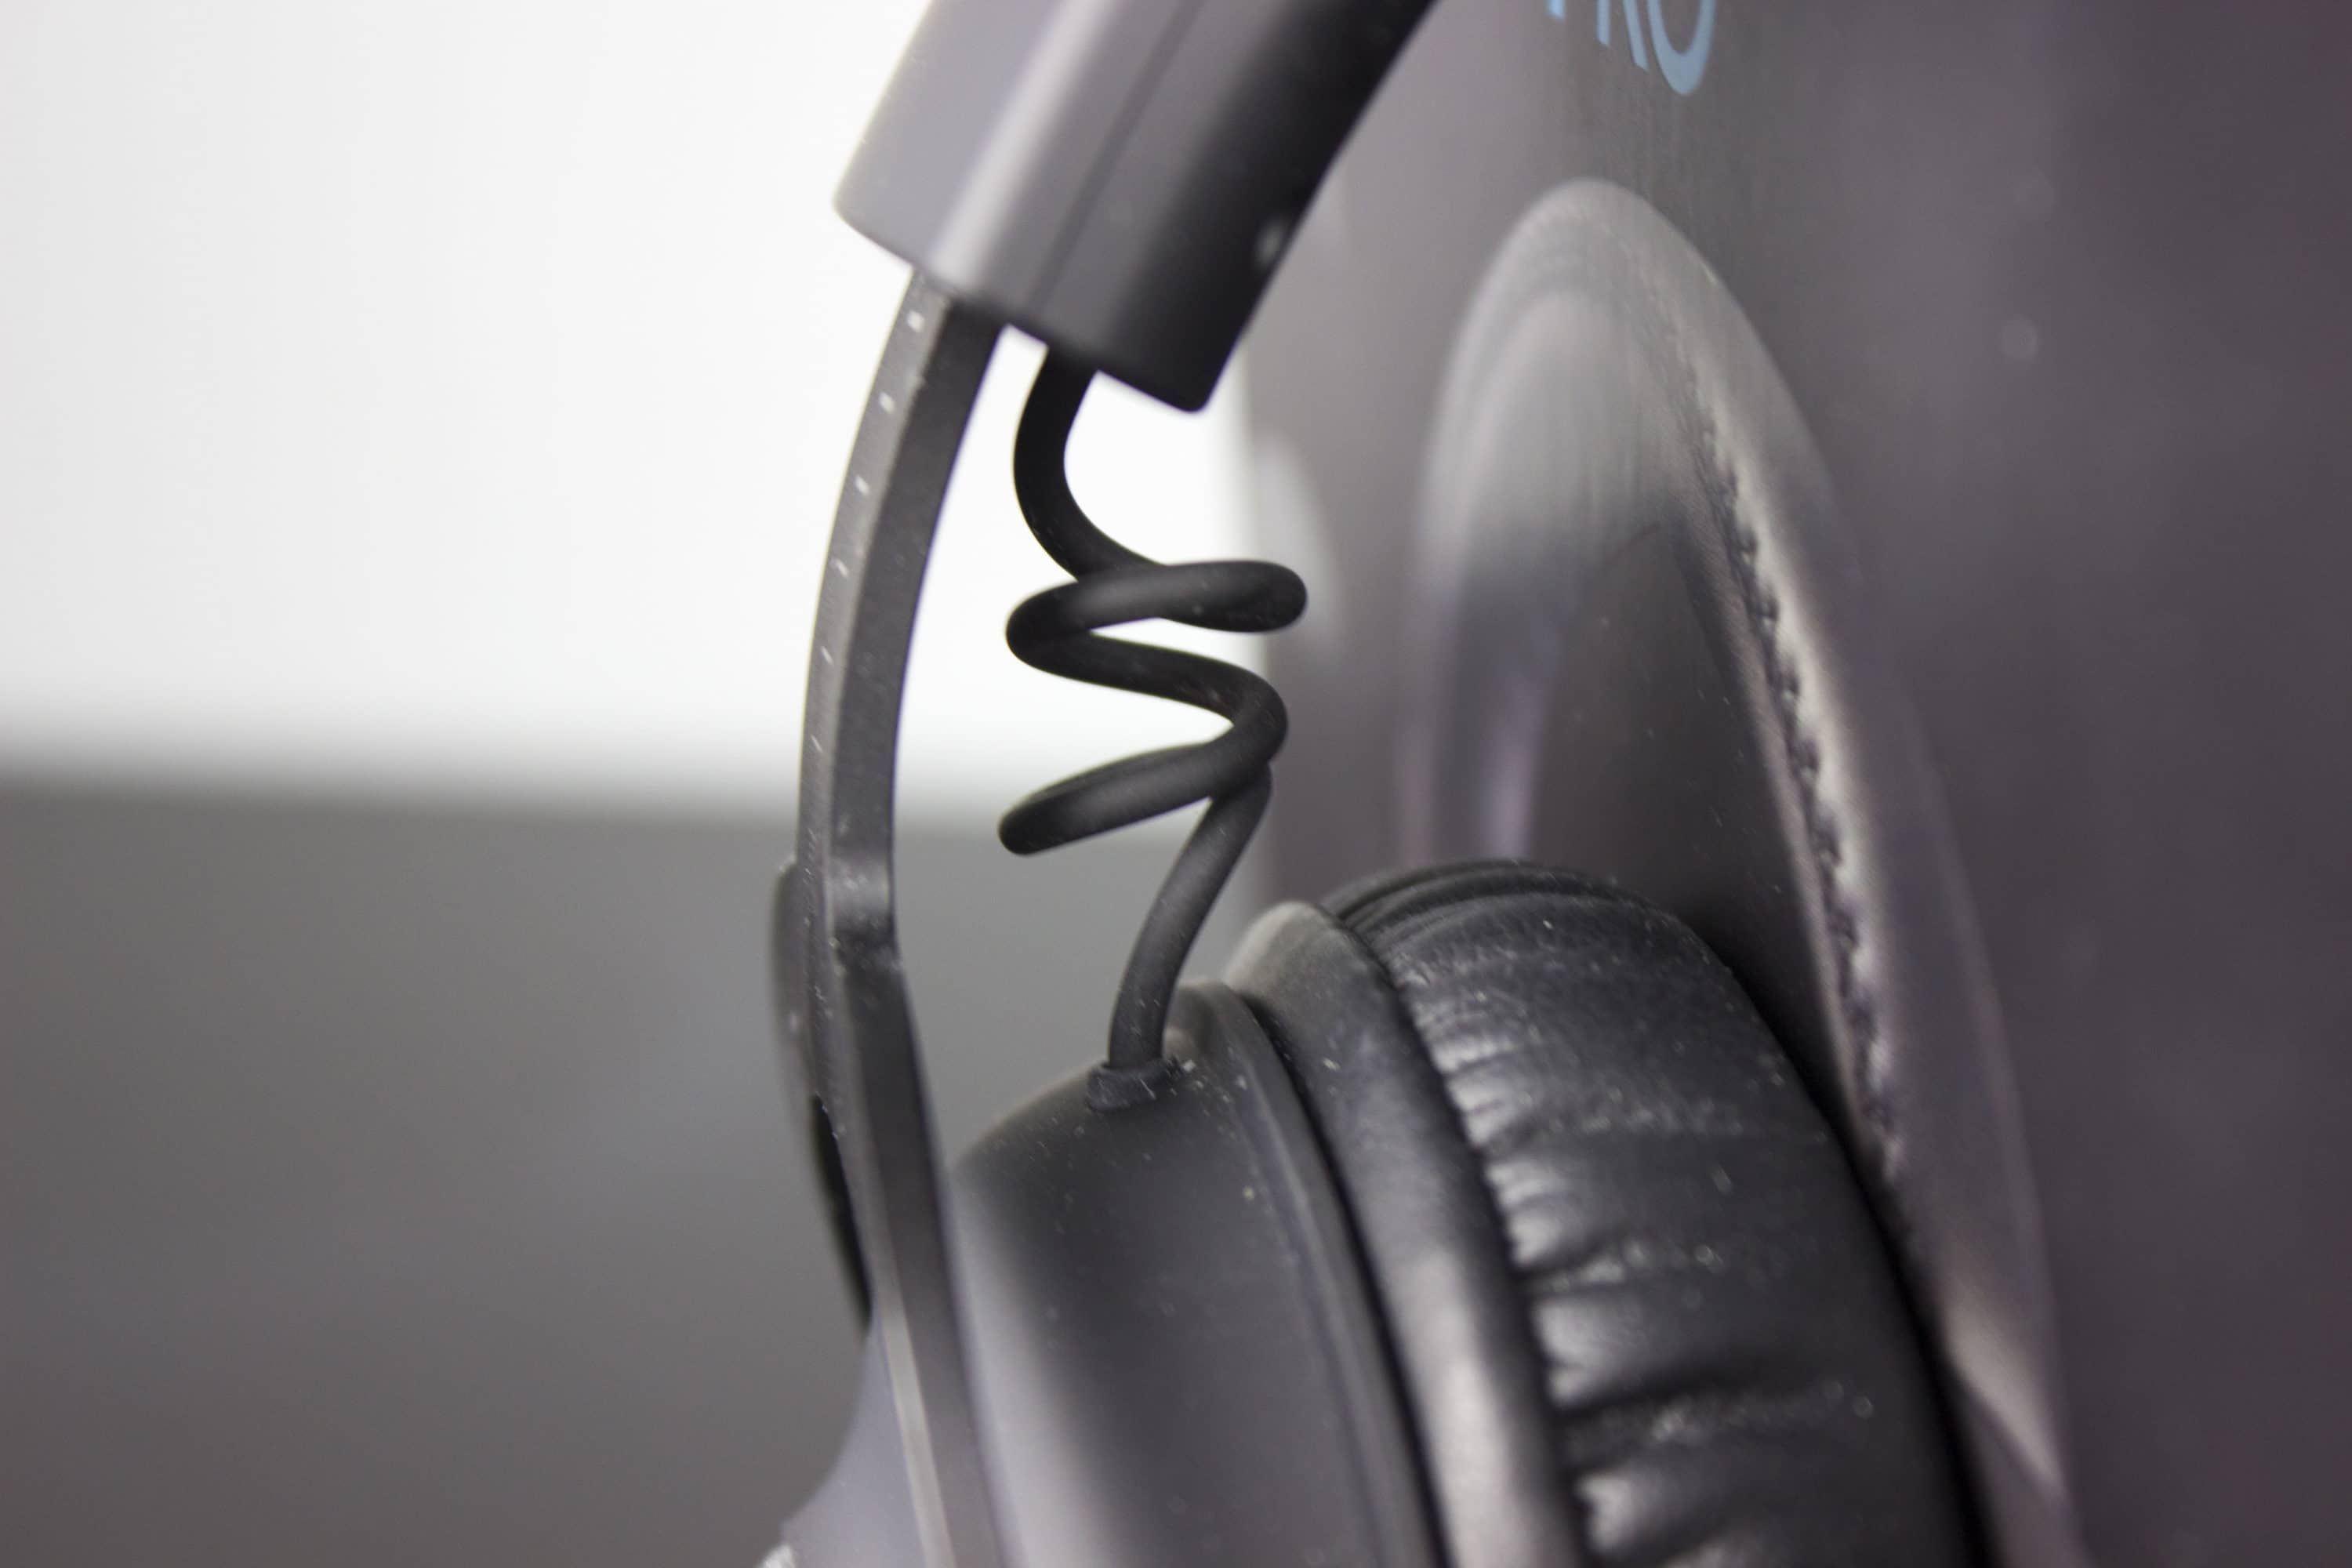 Logitech G Pro X Headset Review - Top Model from